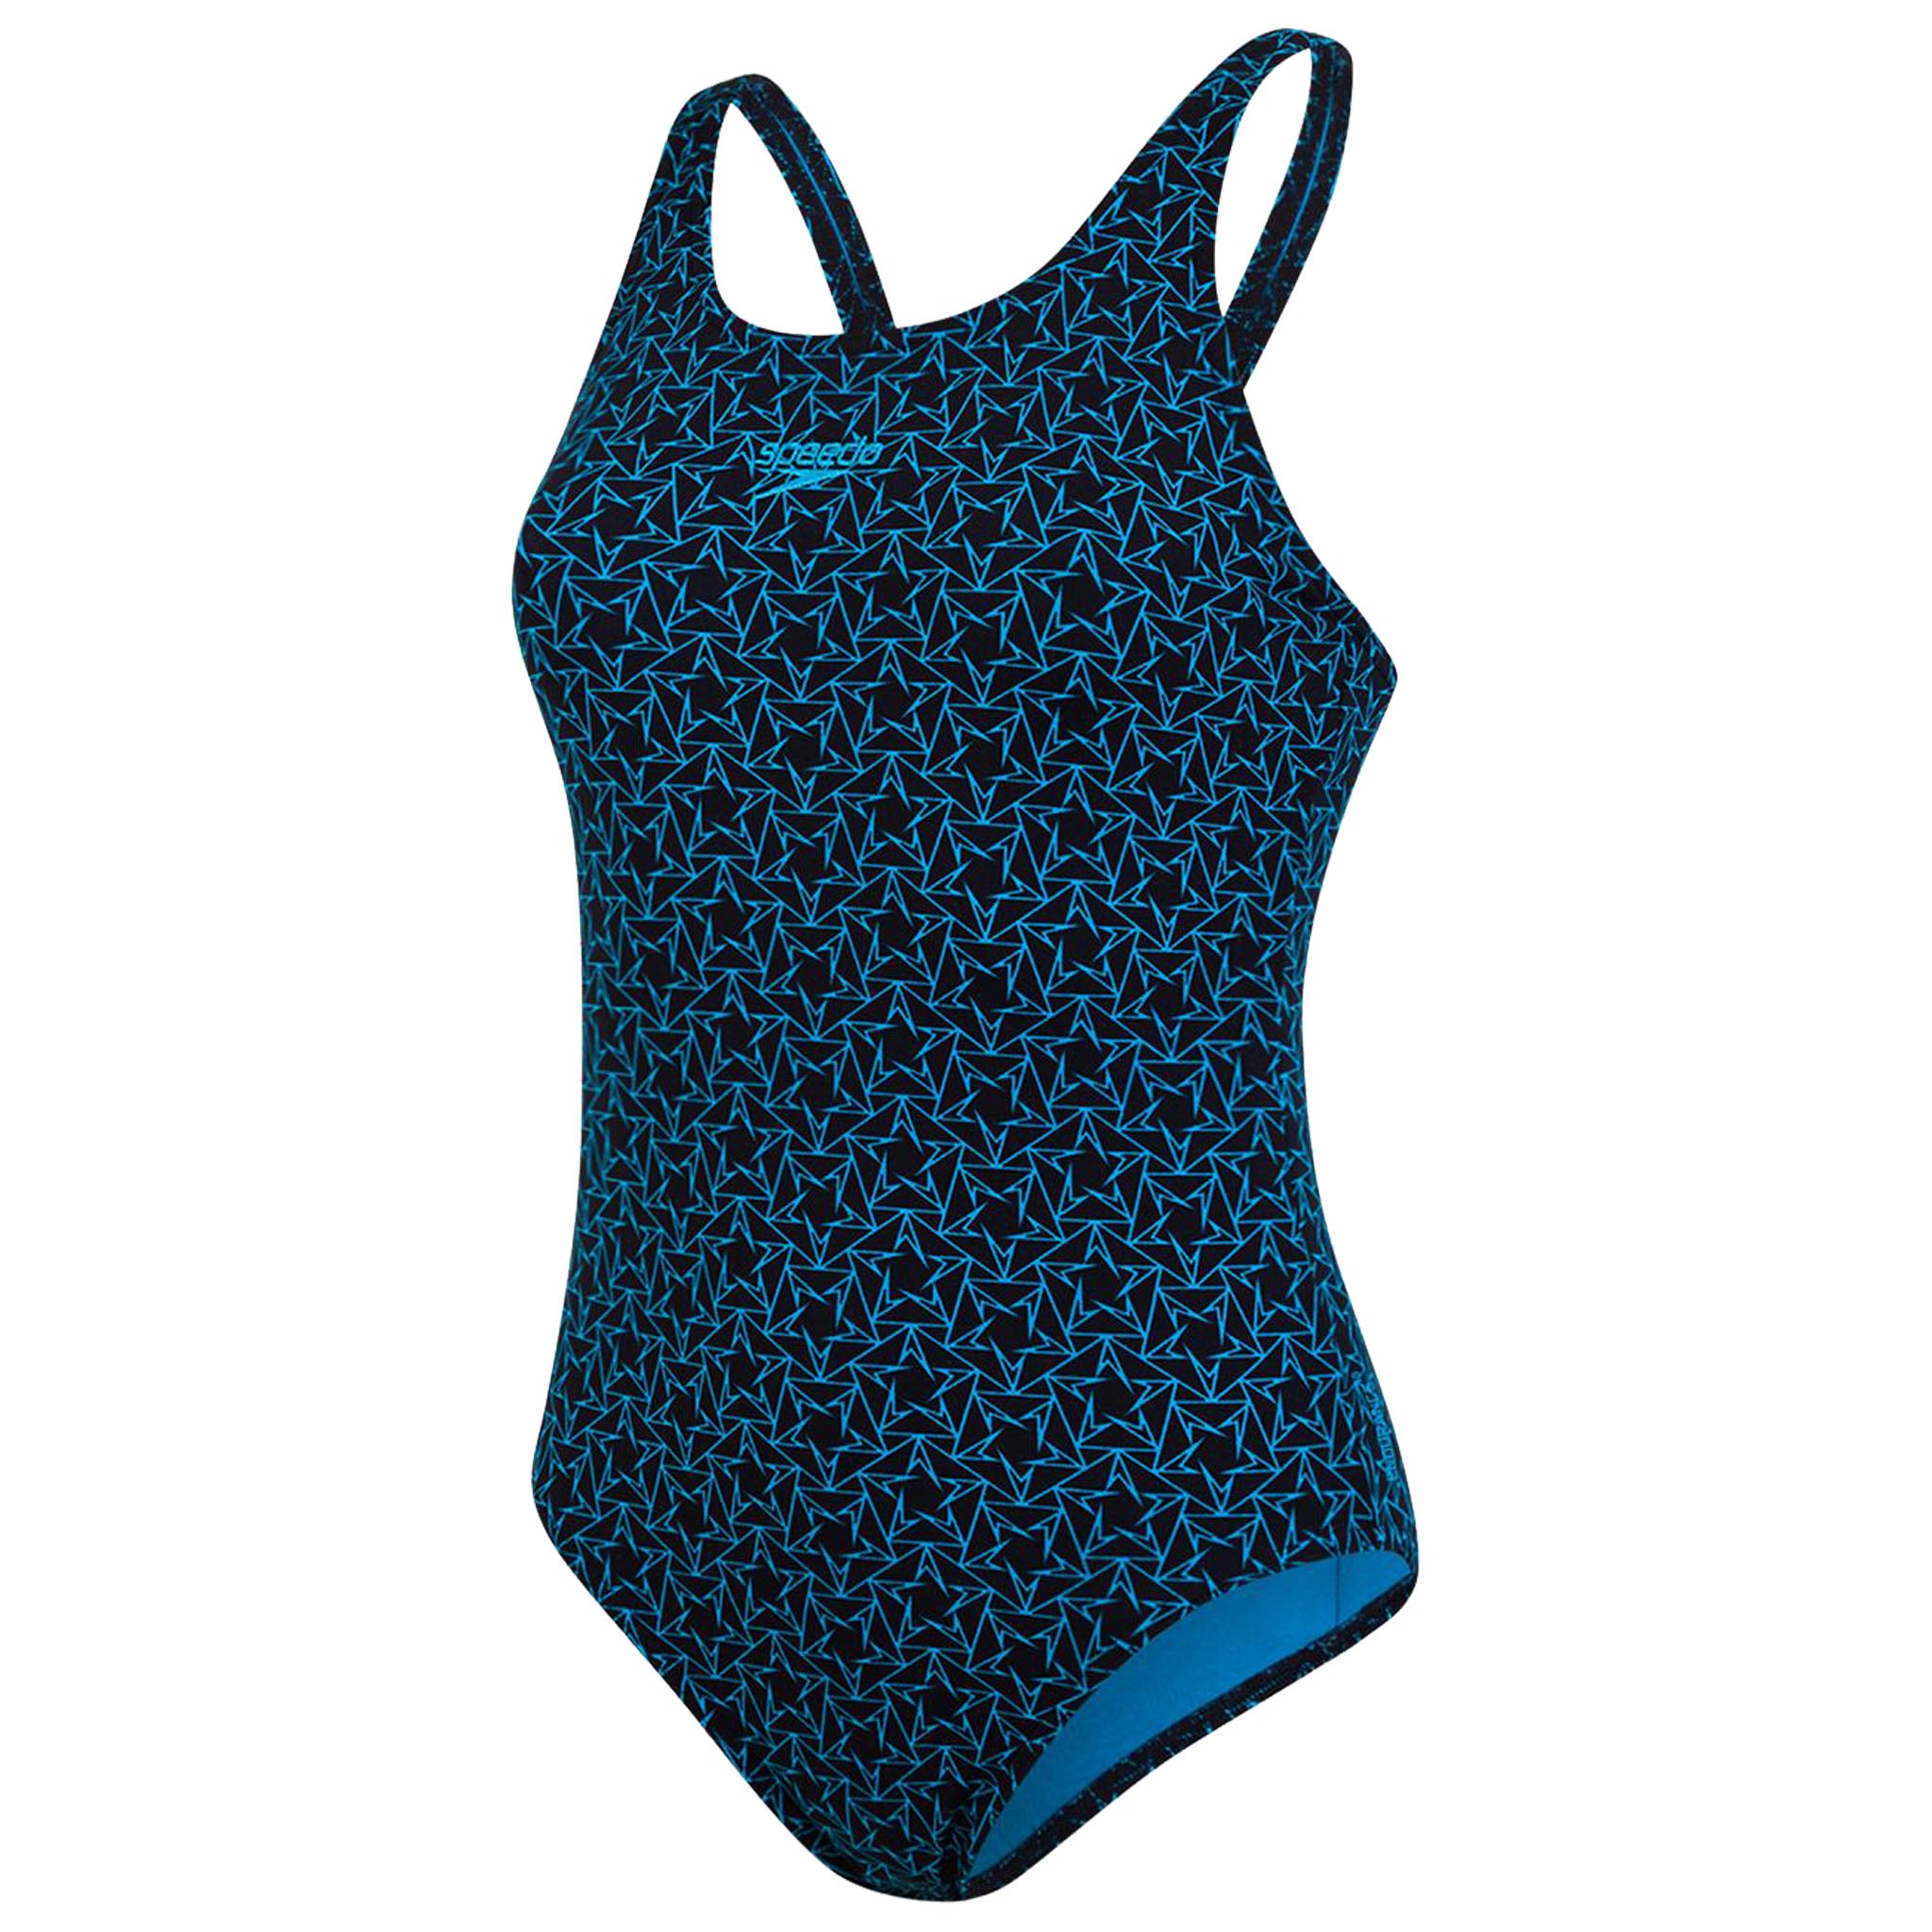 Speedo Boomstar Allover Muscleback Swimsuit - Navy/Blue Front Silhouette